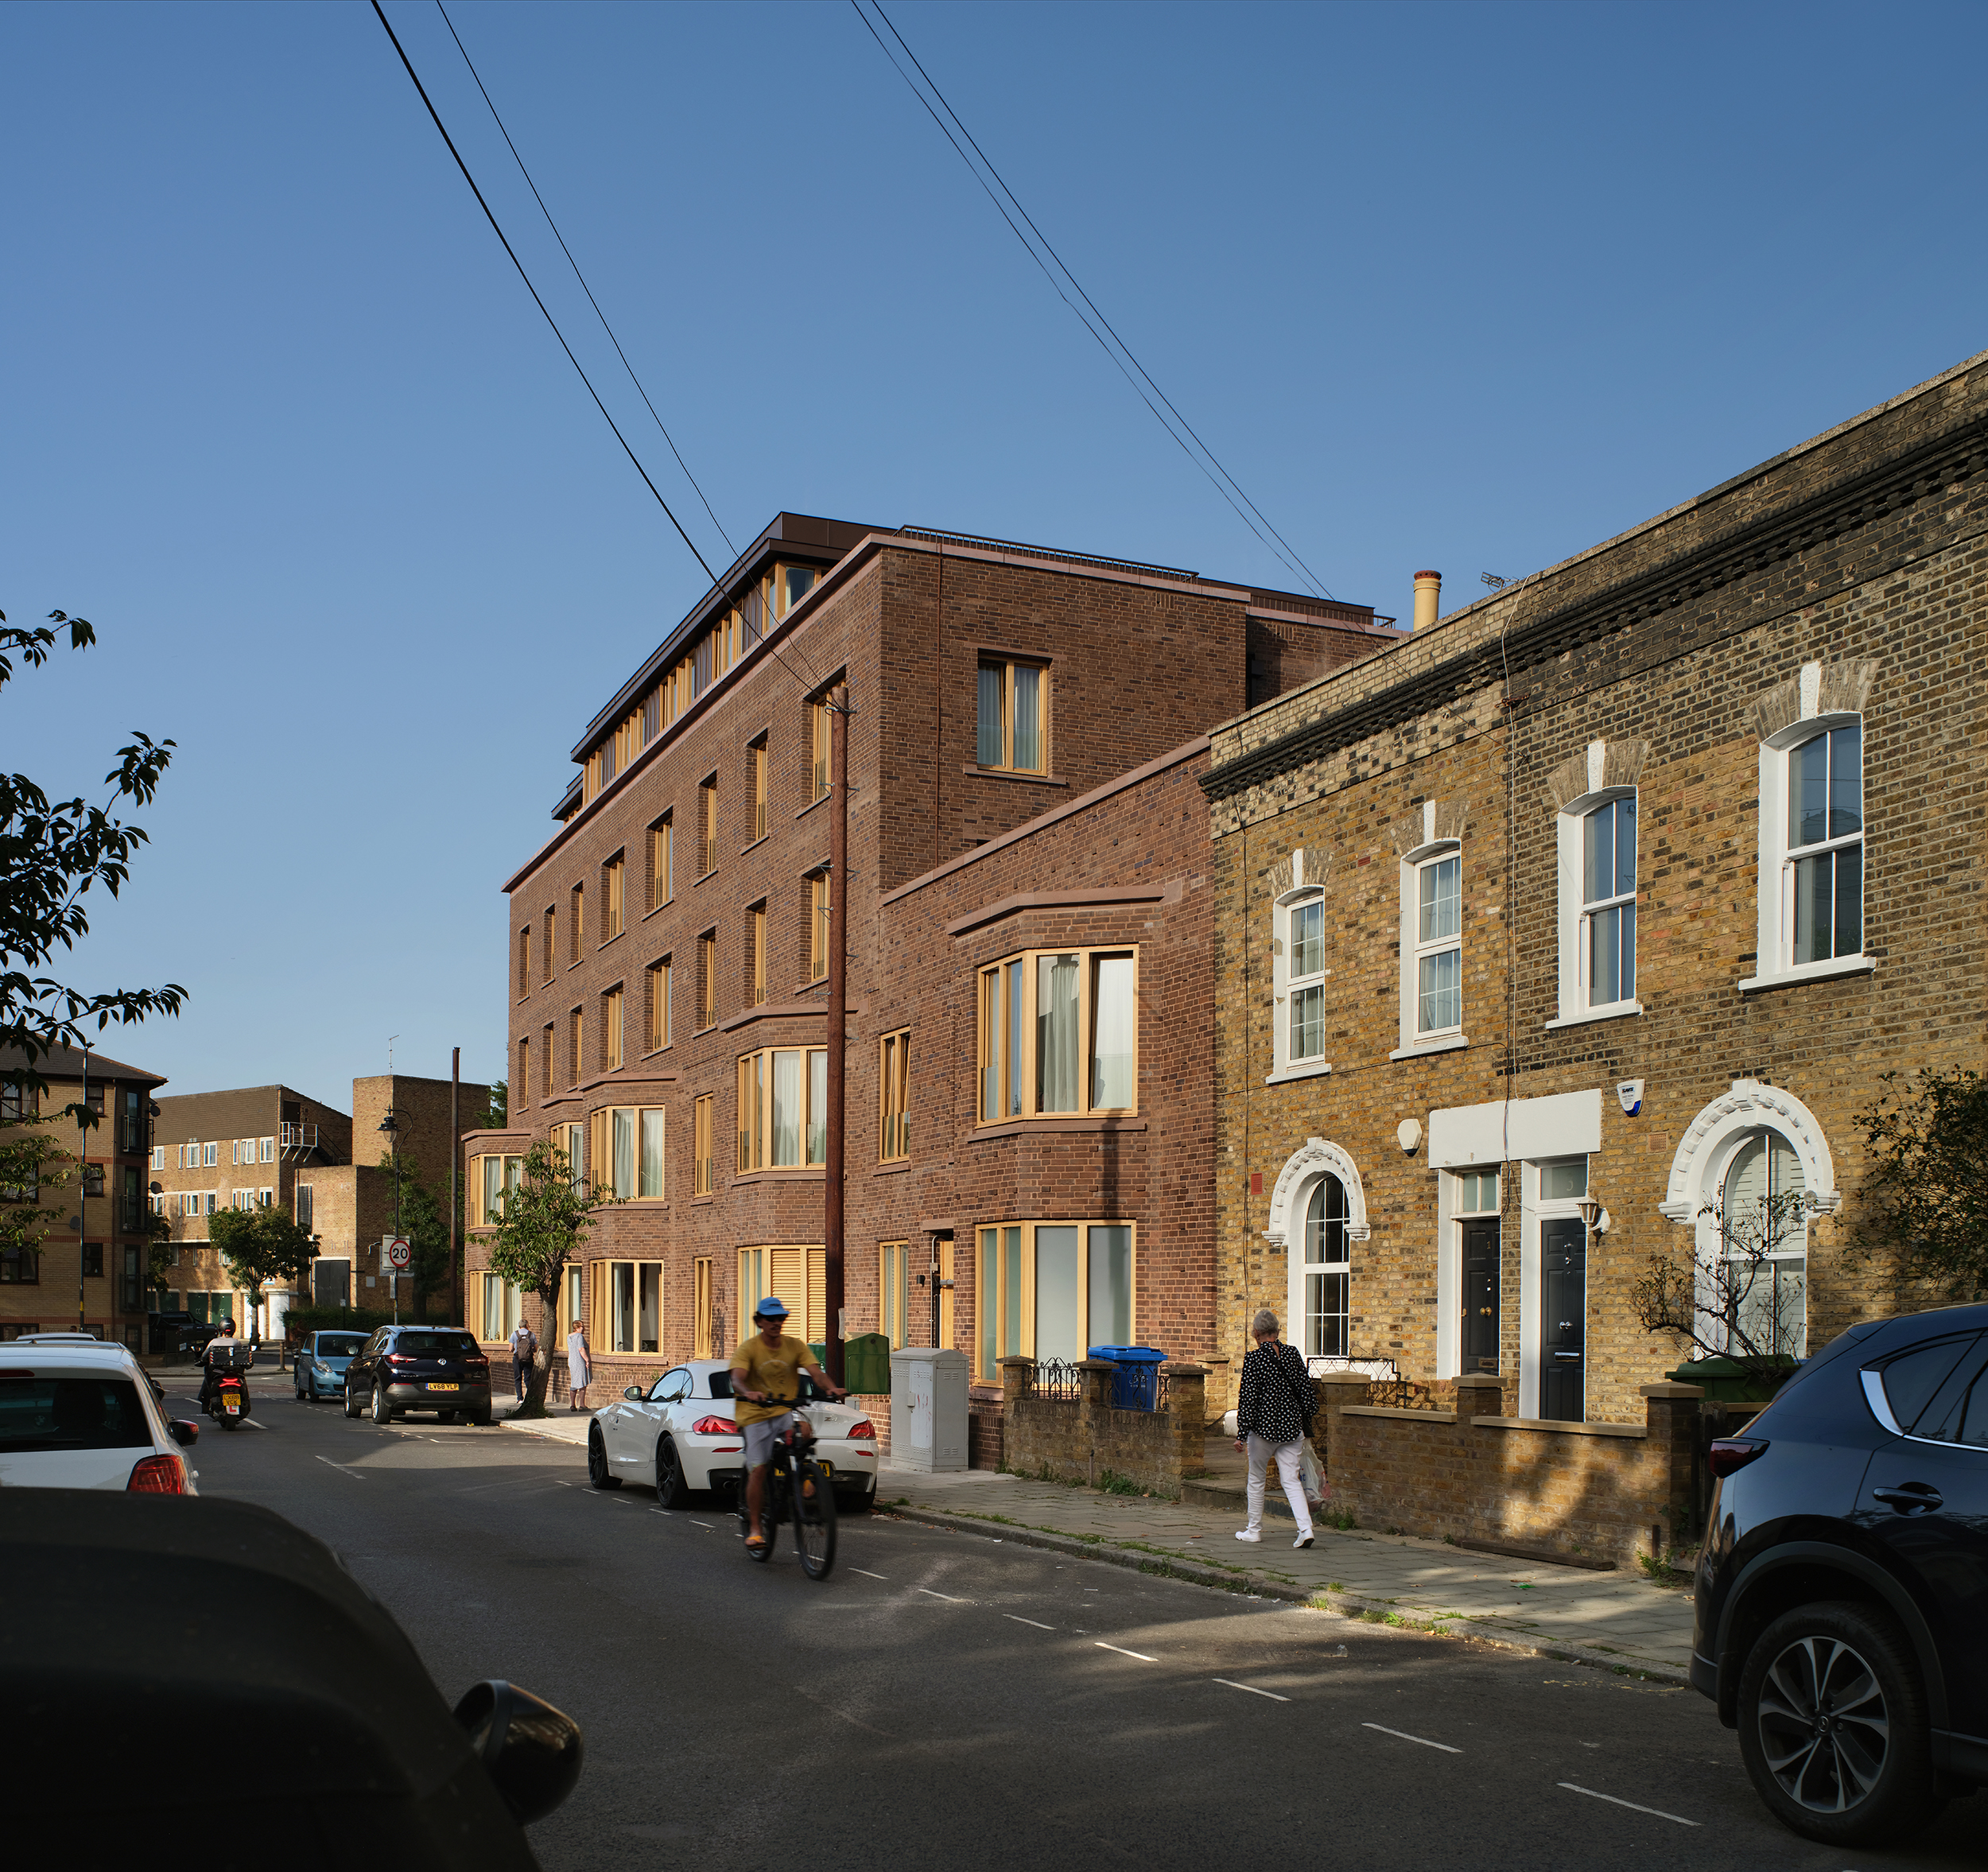 Reverdy Road Elevation, extending the grain of Victorian terraces.